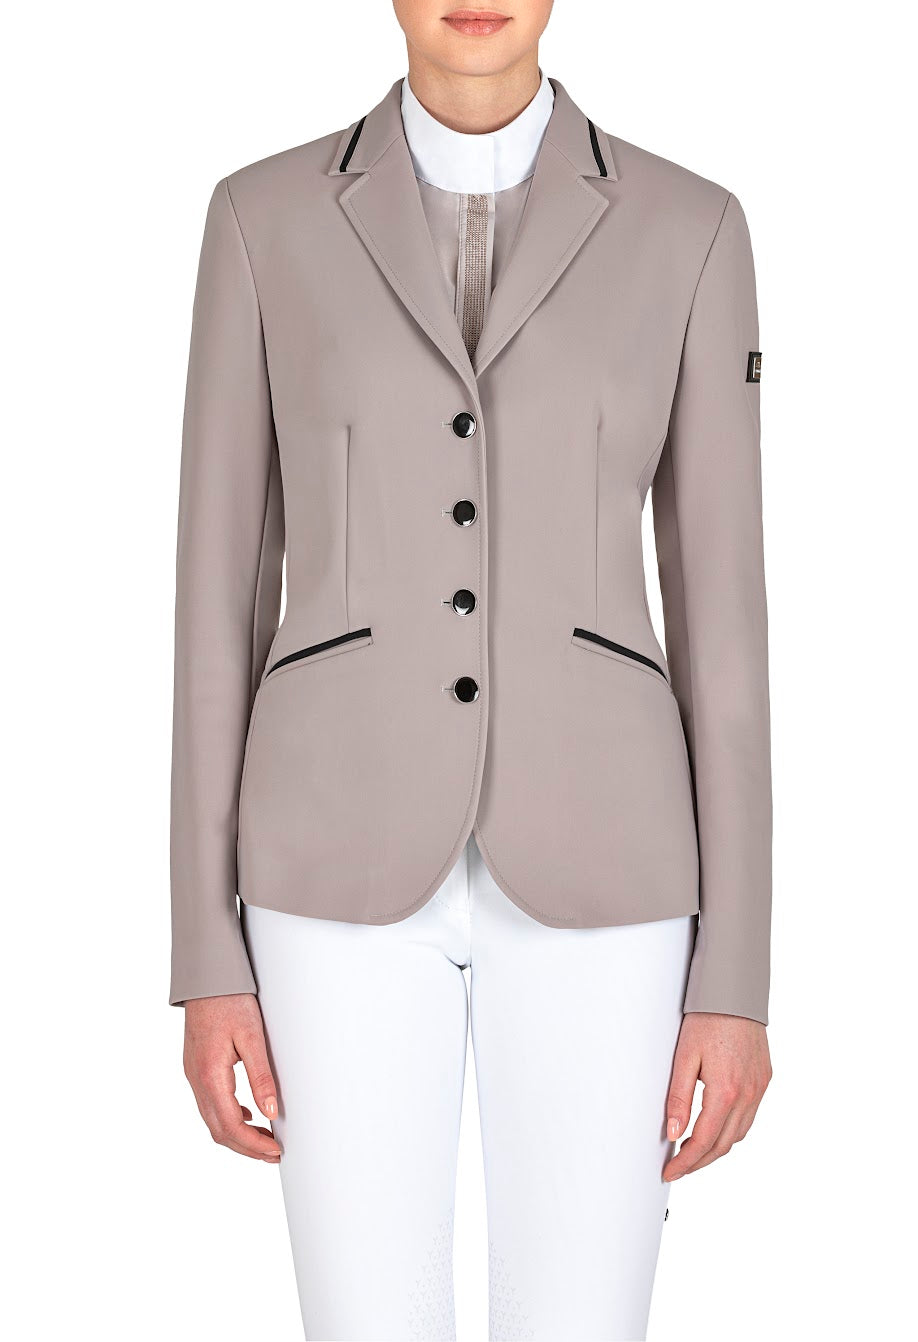 The Giacca contrast trim Equiline show jackets is perfect for this season. The show jacket has insert contrast trim in black on the collar and pockets for a clean sophisticated look. The enamelled buttons on cuff and front give this jacket an elegant finish.   Made from Equines B-Move lightweight fabric which guarantees maximum movement and performance. The fabrics construction allows air flow through the fibres enabling body comfort and the three dimensional stretch allows ease of movement. 